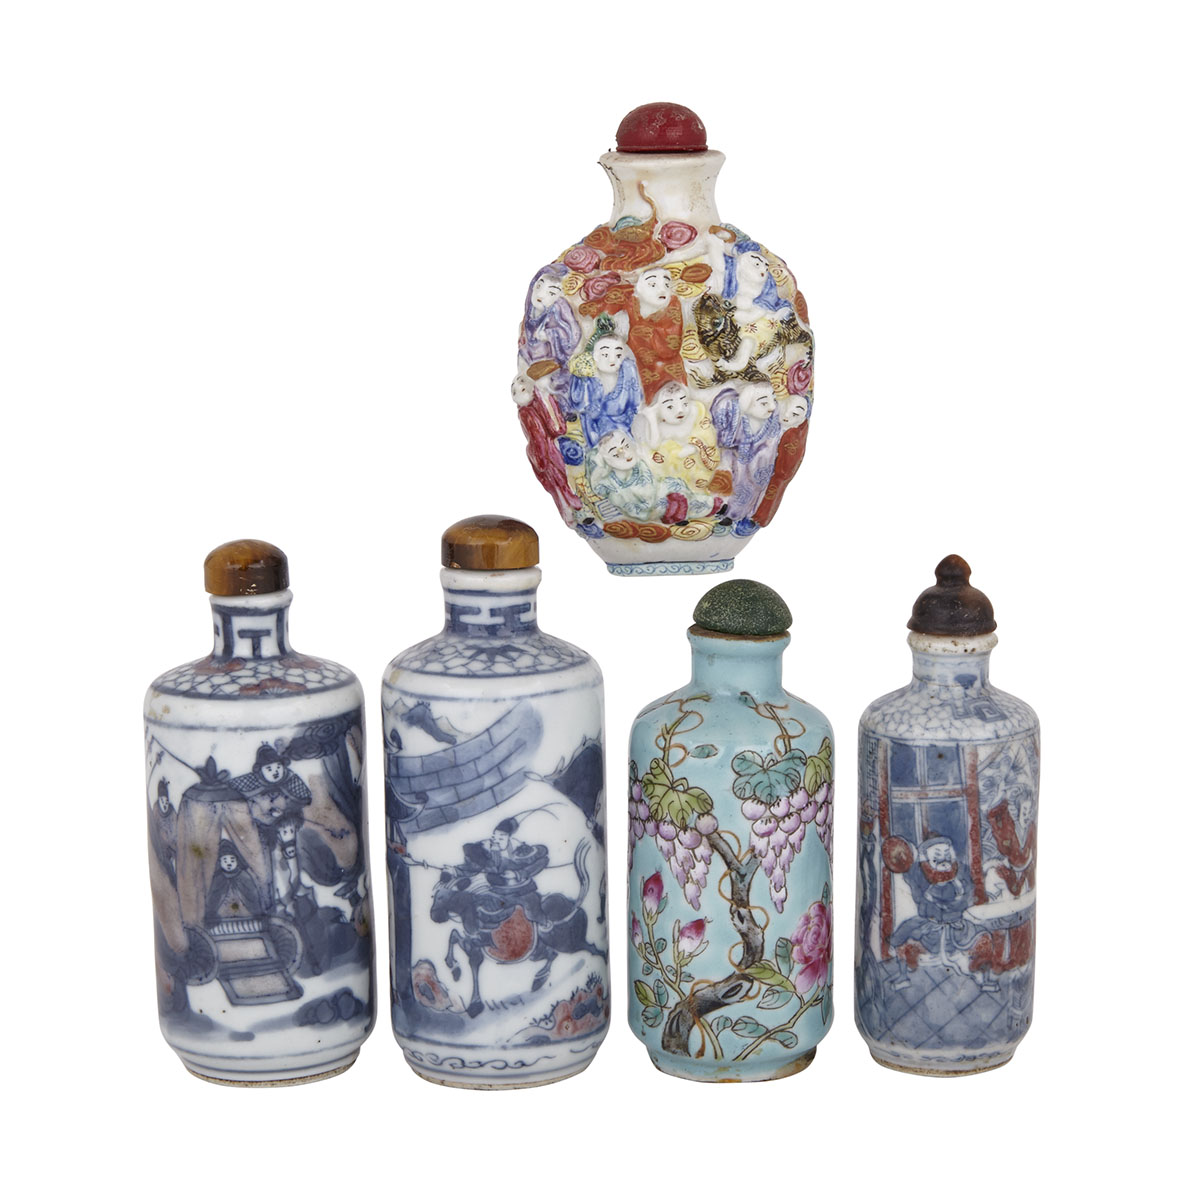 Group of Five Porcelain Snuff Bottles, 19th/20th Century